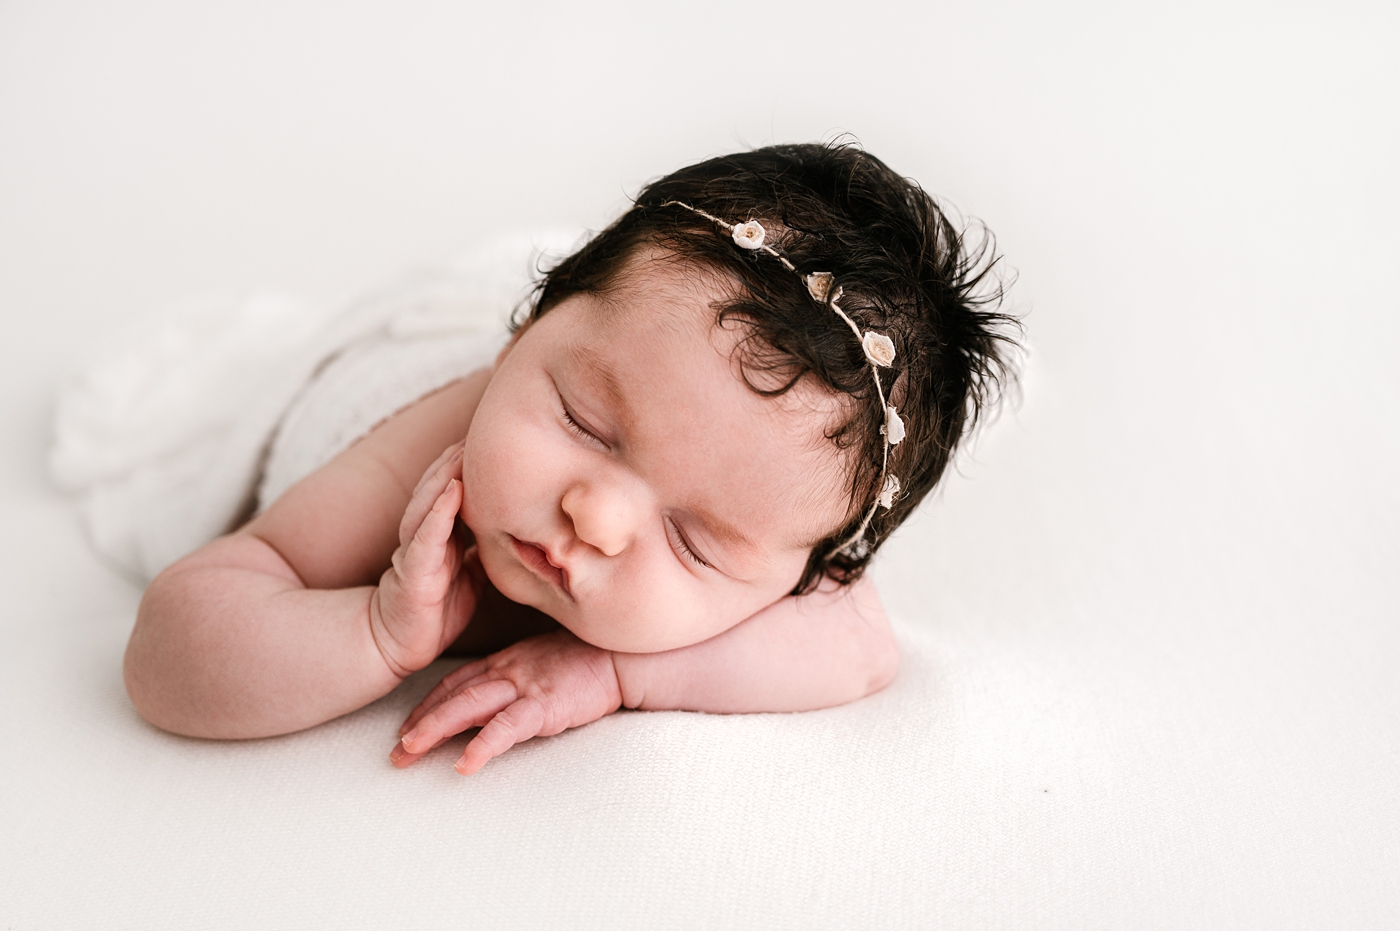 Baby girl rests hand atop her face during her newborn session. Image by Meg Newton Photography.